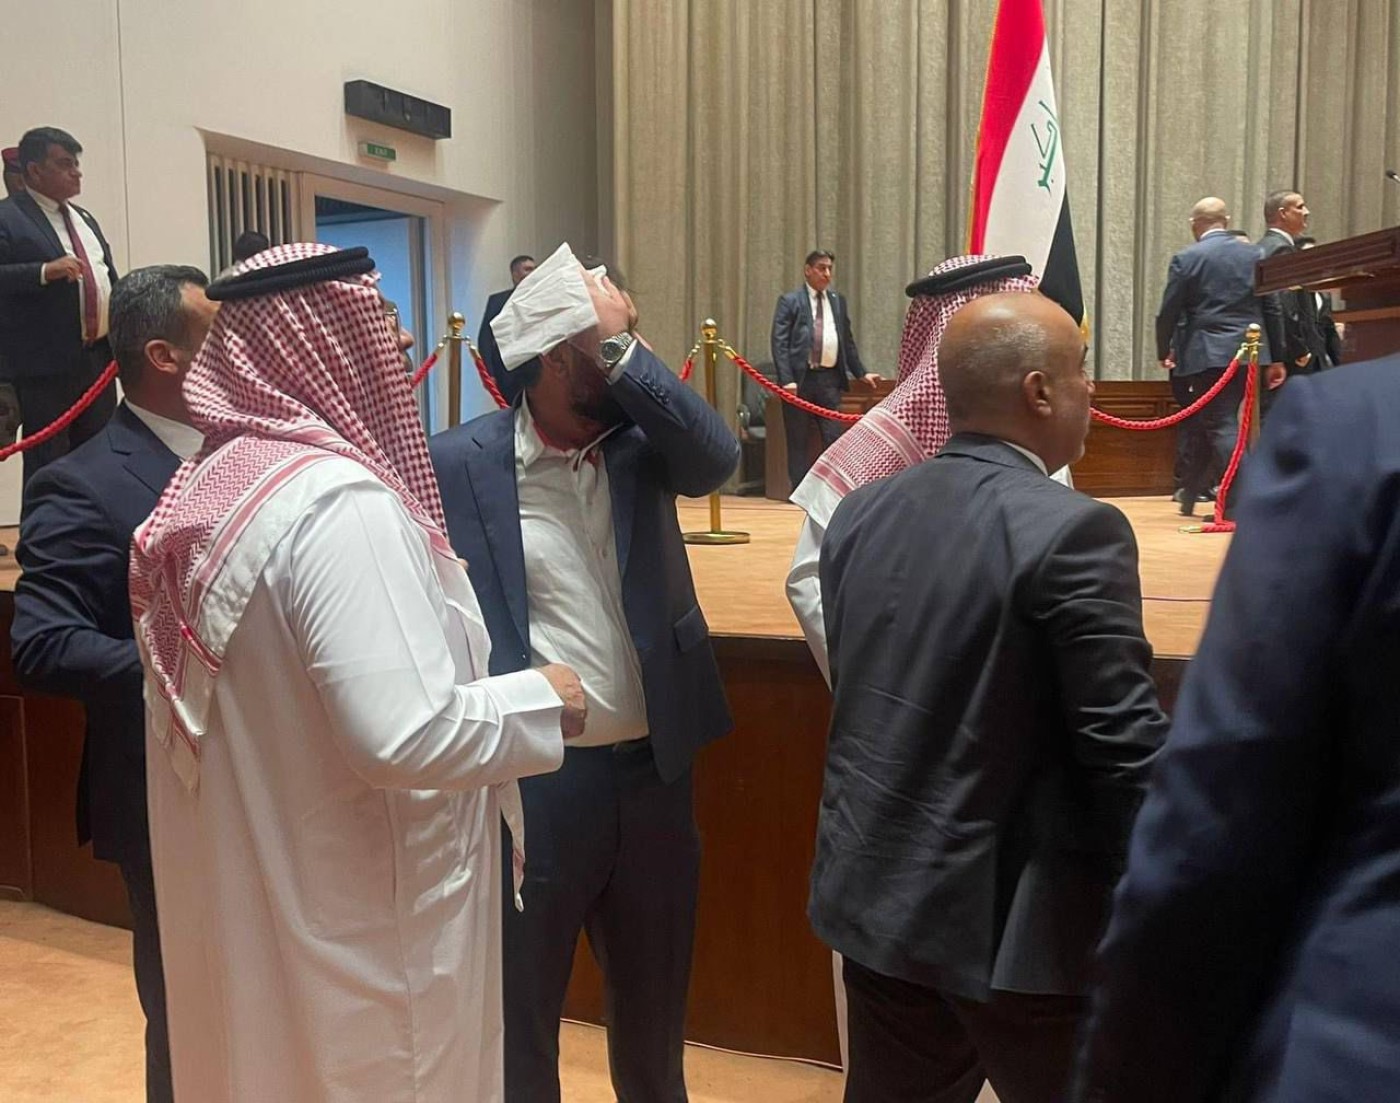 Iraq fails to elect new parliament speaker, session ends in brawl Image